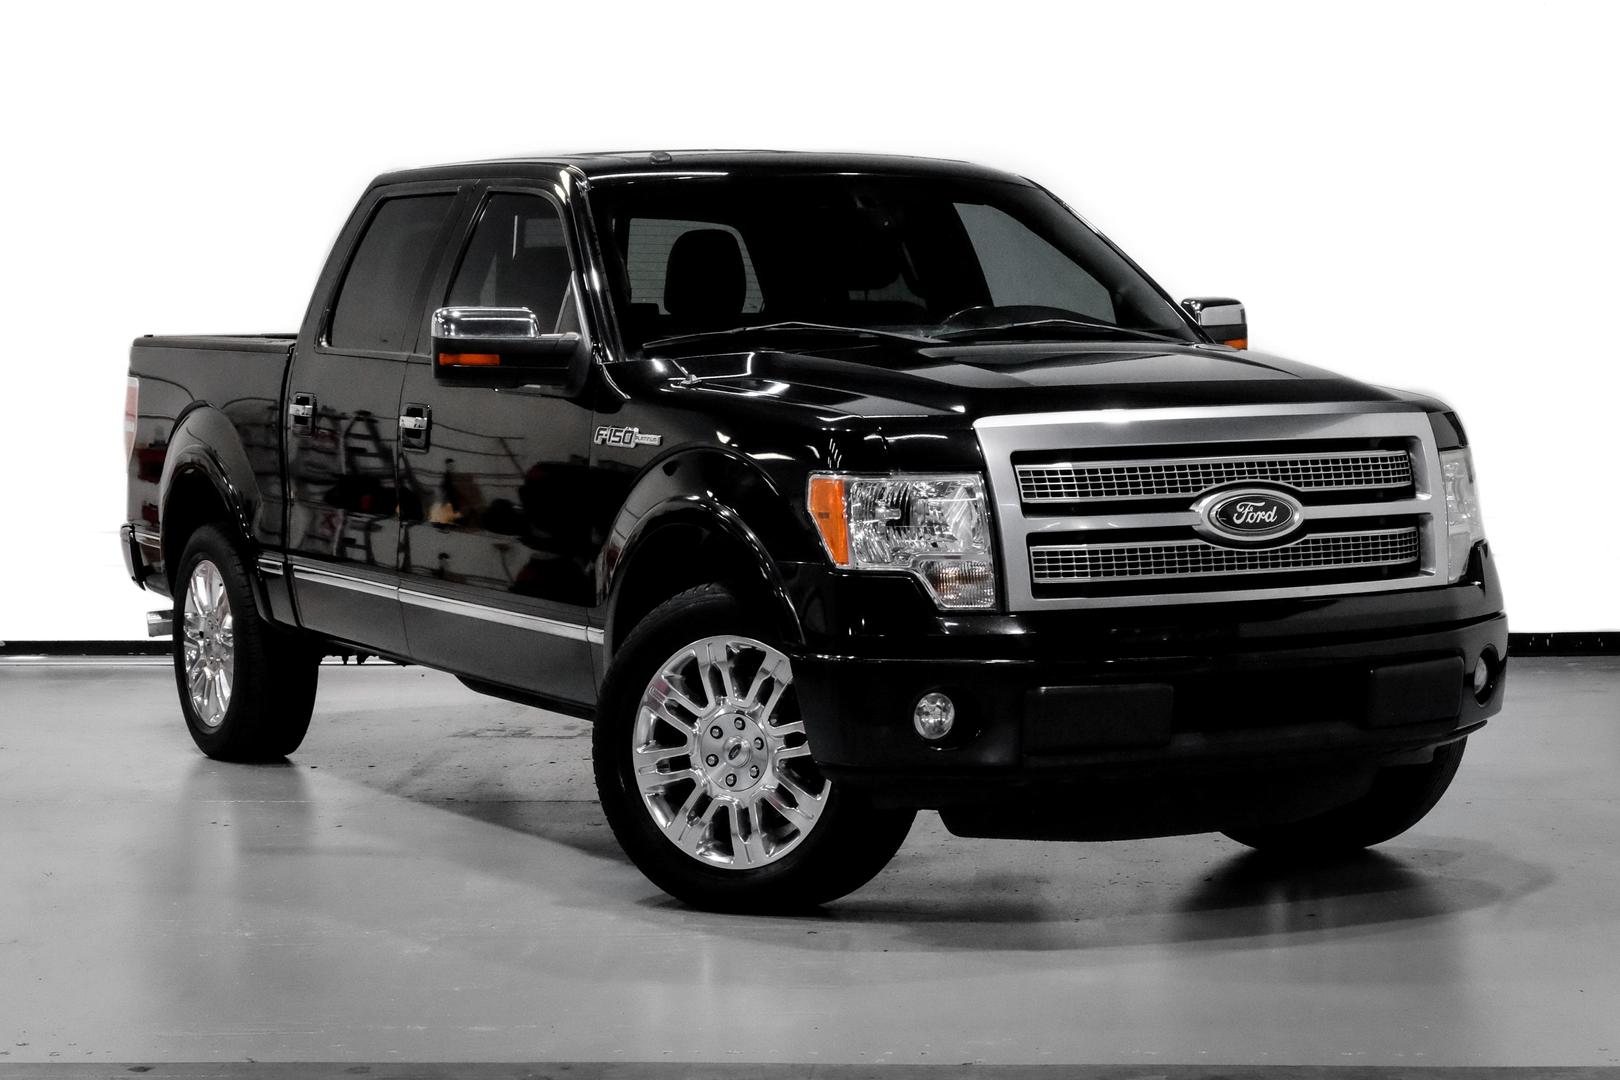 USED FORD F150 SUPERCREW CAB 2011 for sale in Dallas, TX Driven